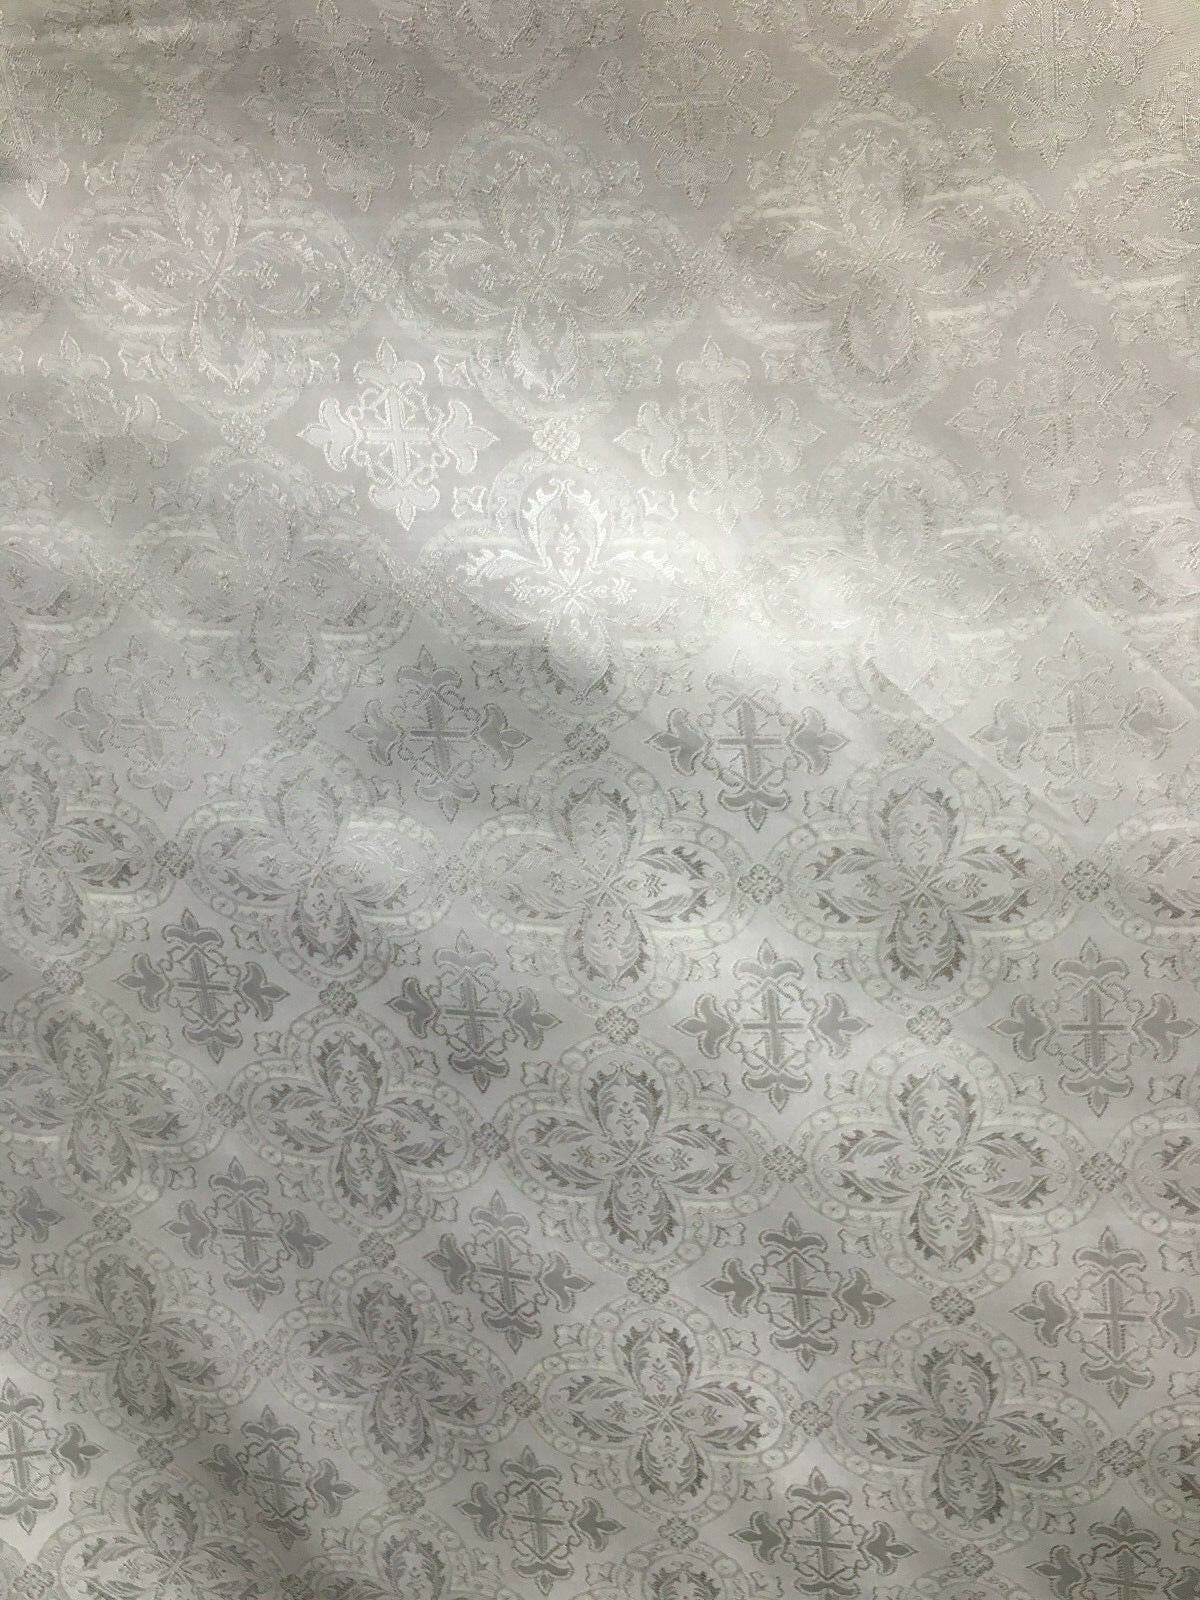 SILVER GRAY Liturgical Cross Brocade Fabric (60 in.) Sold By The Yard